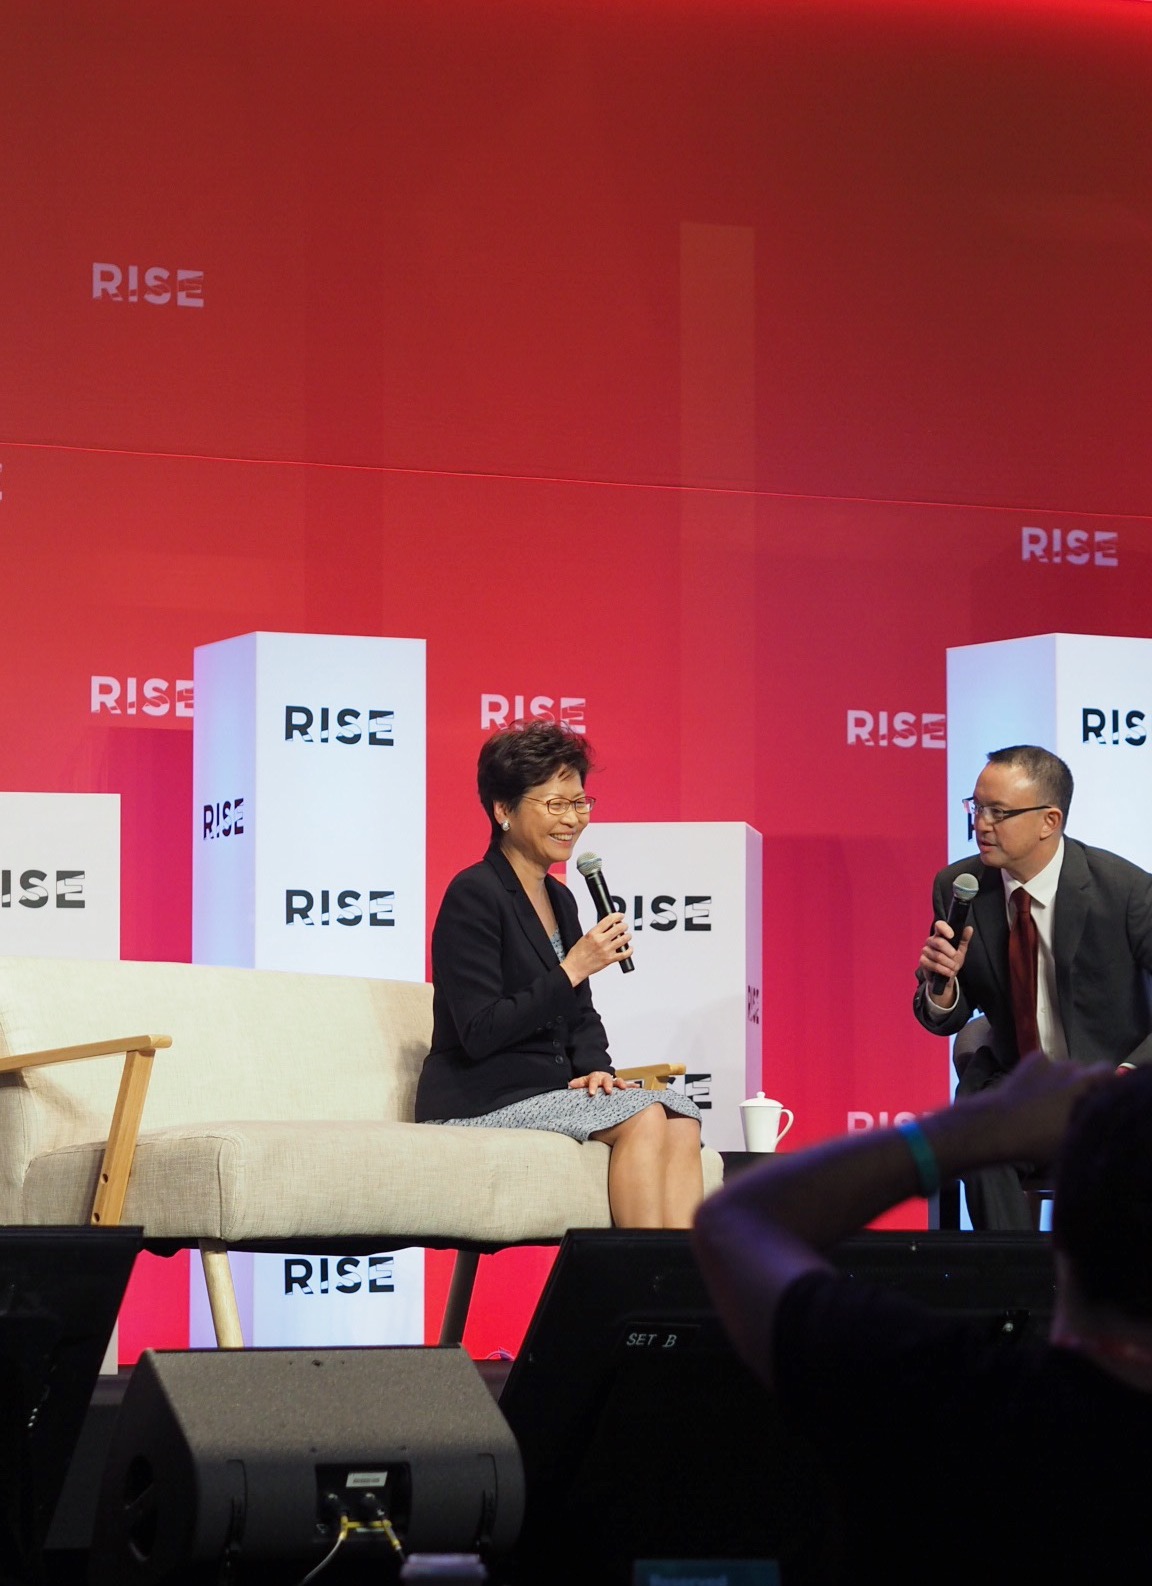 Hong Kong Chief Executive Carrie Lam and CNBC anchor Bernie Lo